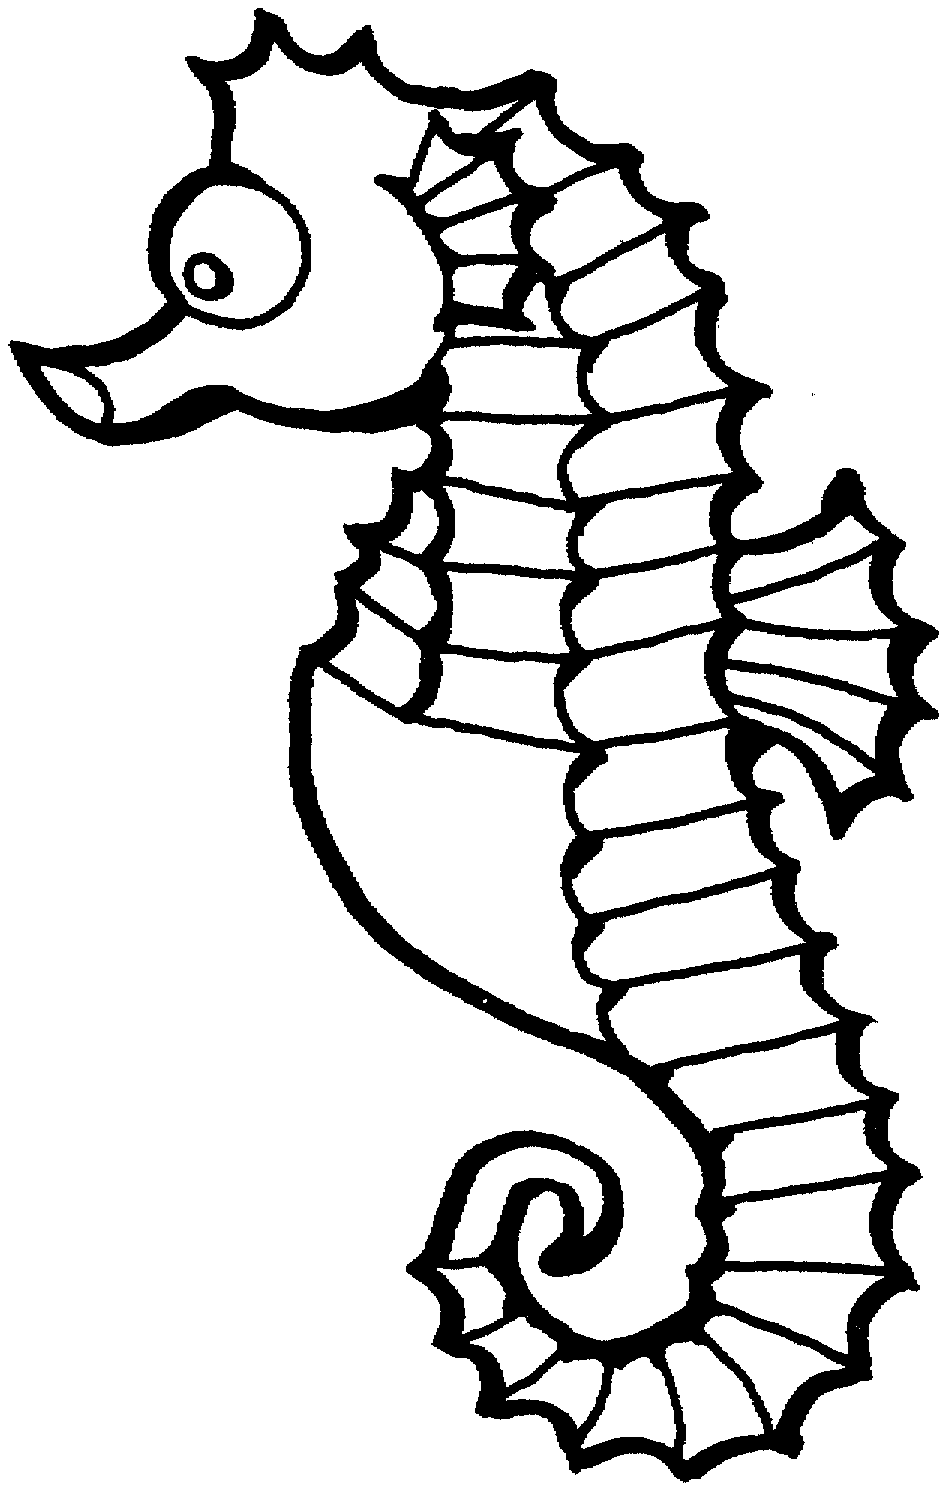 friends across america free printable coloring page sea horse small